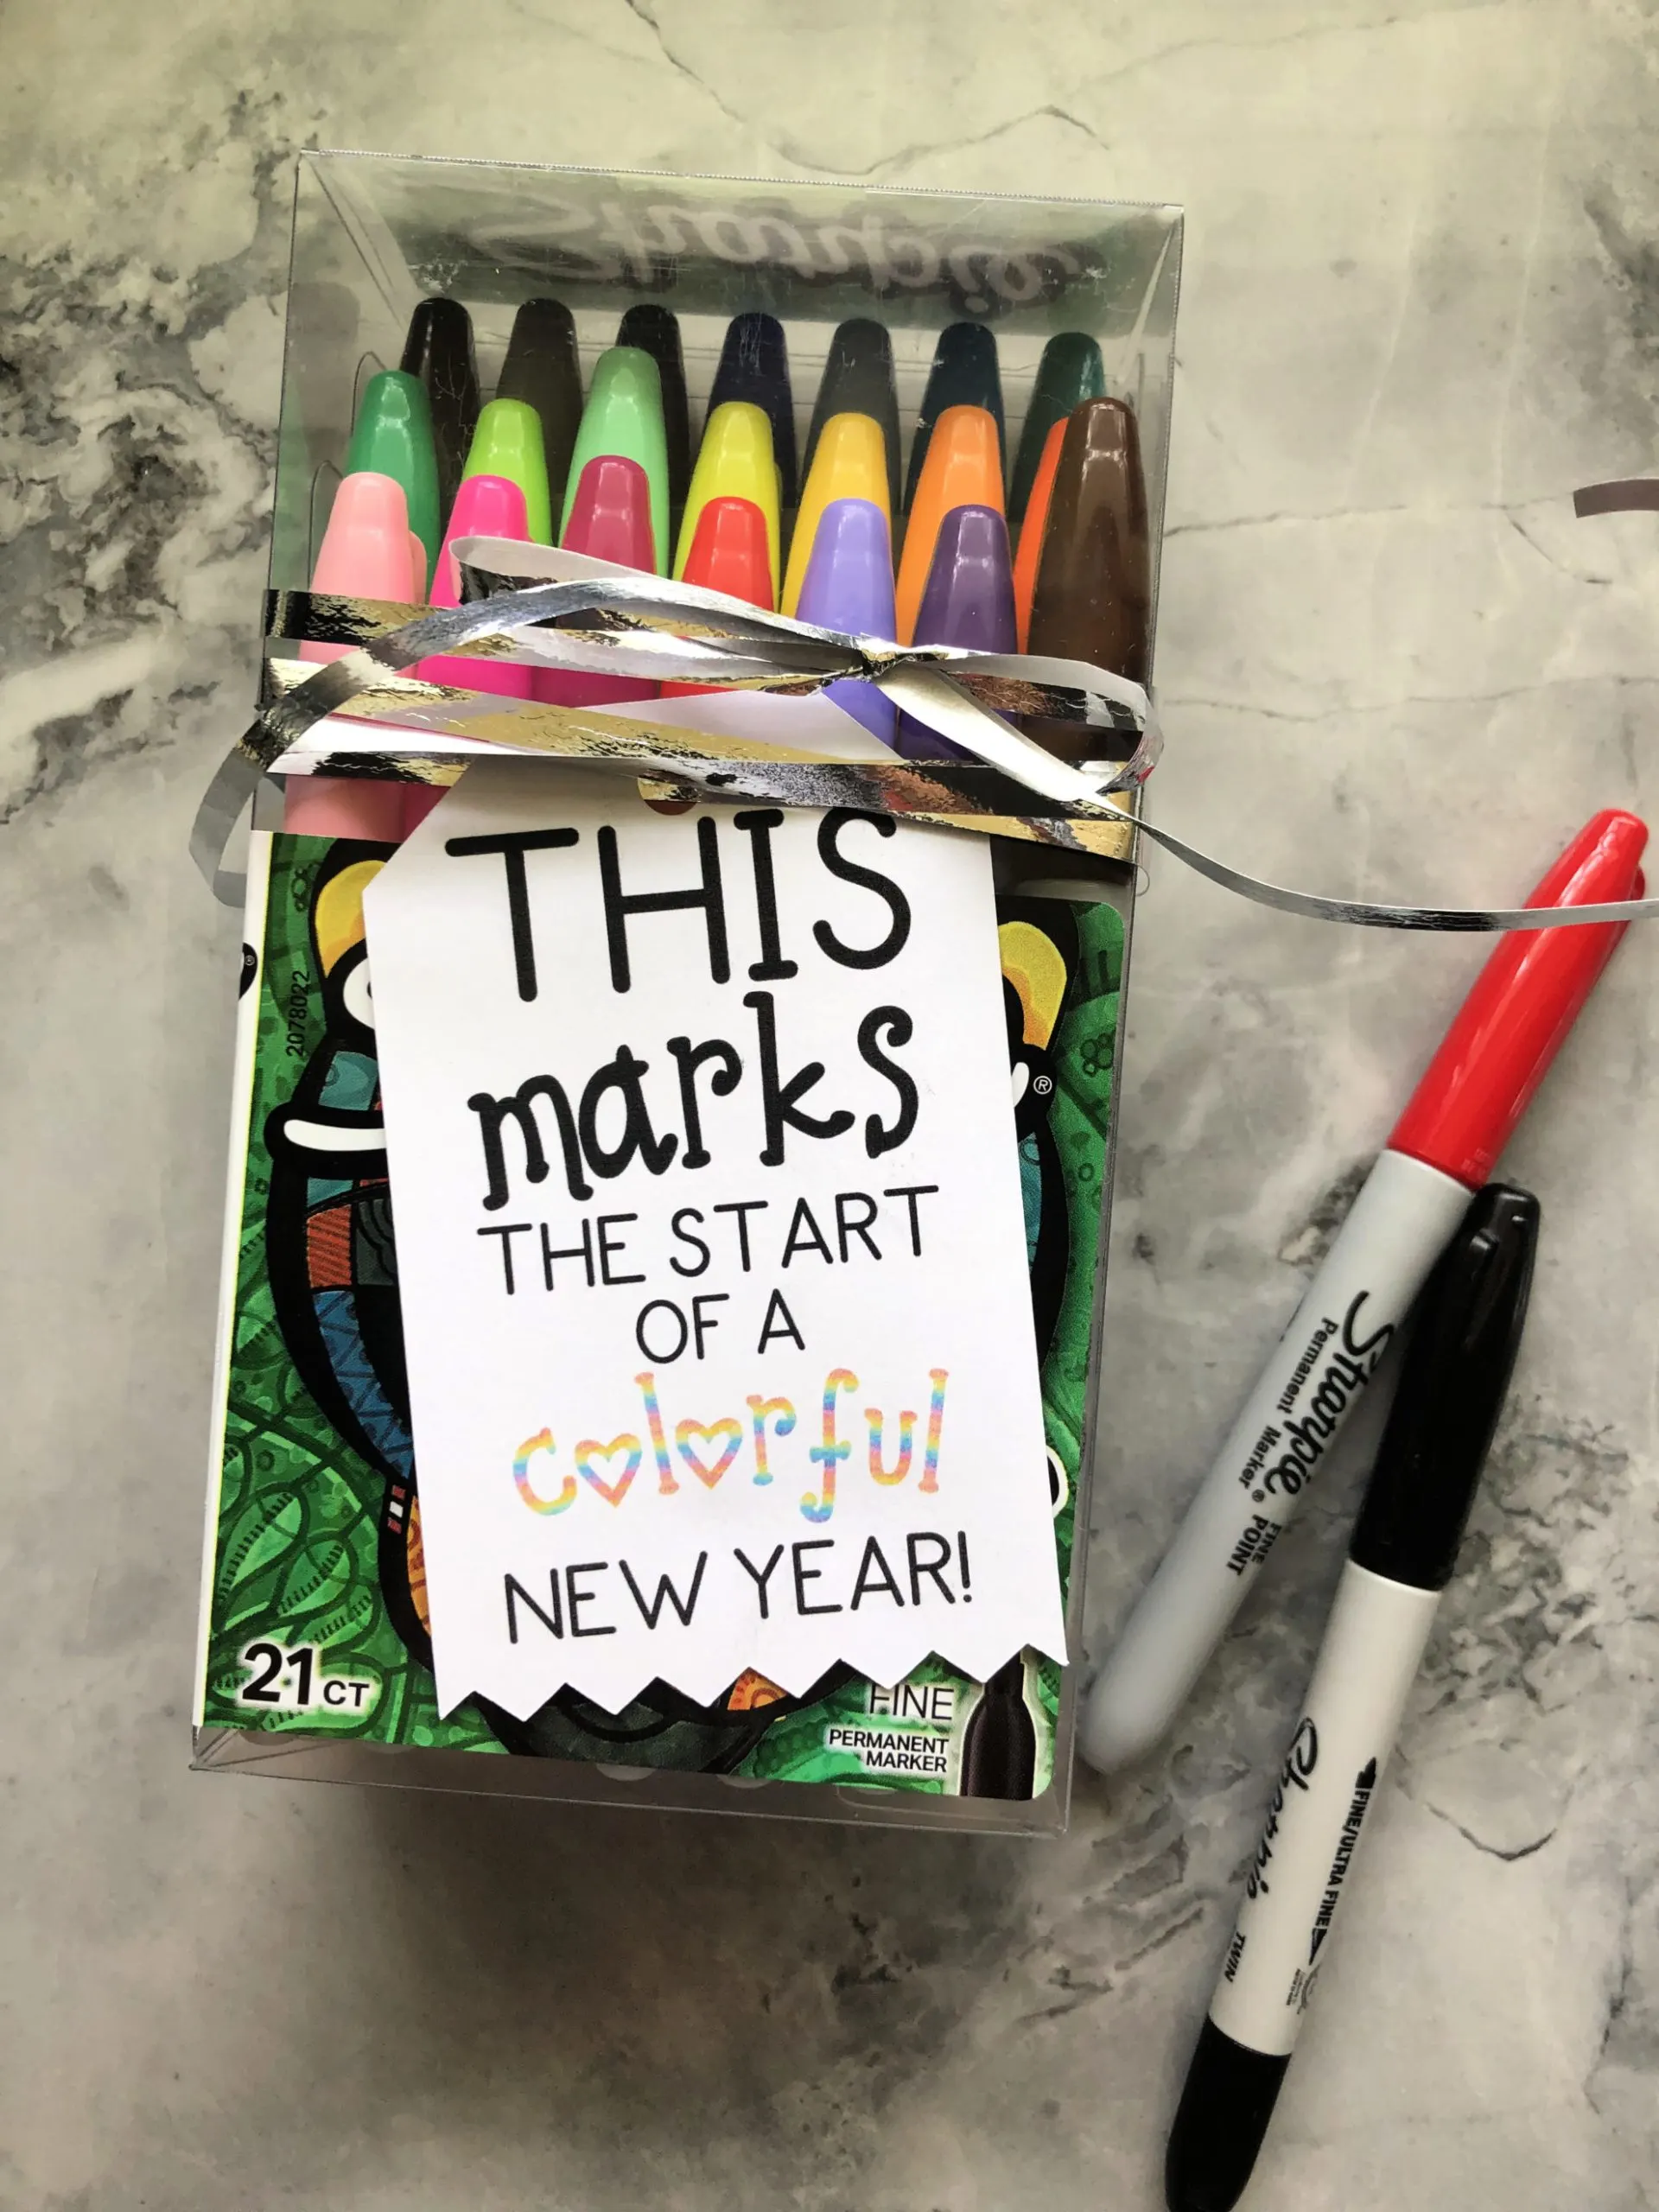 Back To School “Colorful New Year” Printable Gift Tag